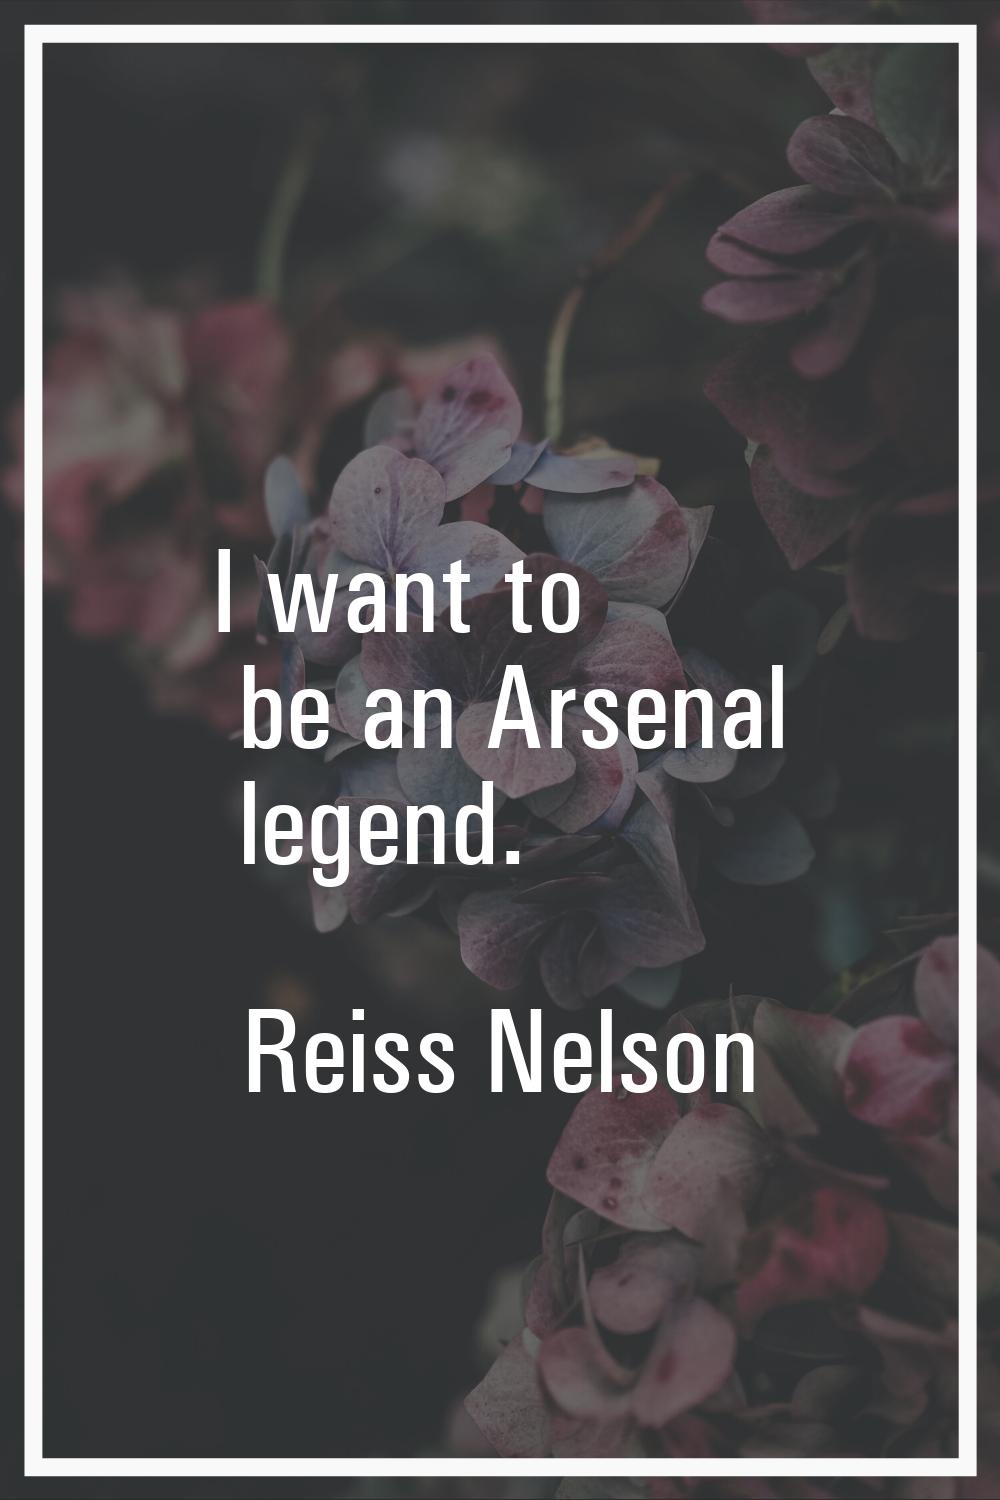 I want to be an Arsenal legend.